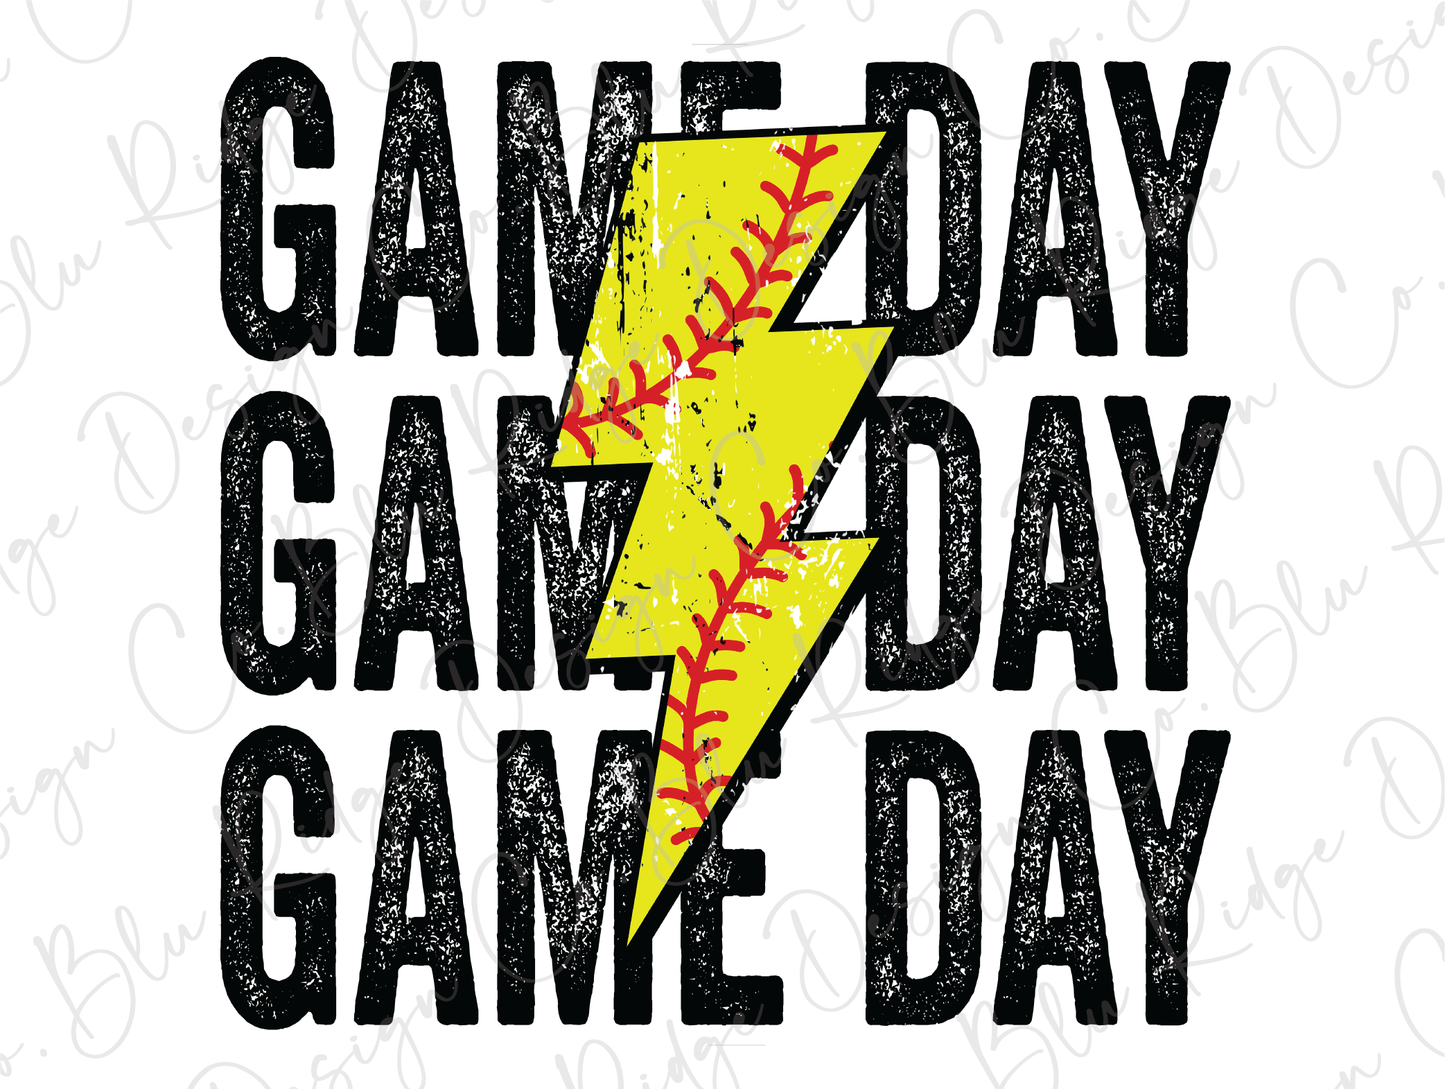 a baseball with a lightning bolt and the words game day game day